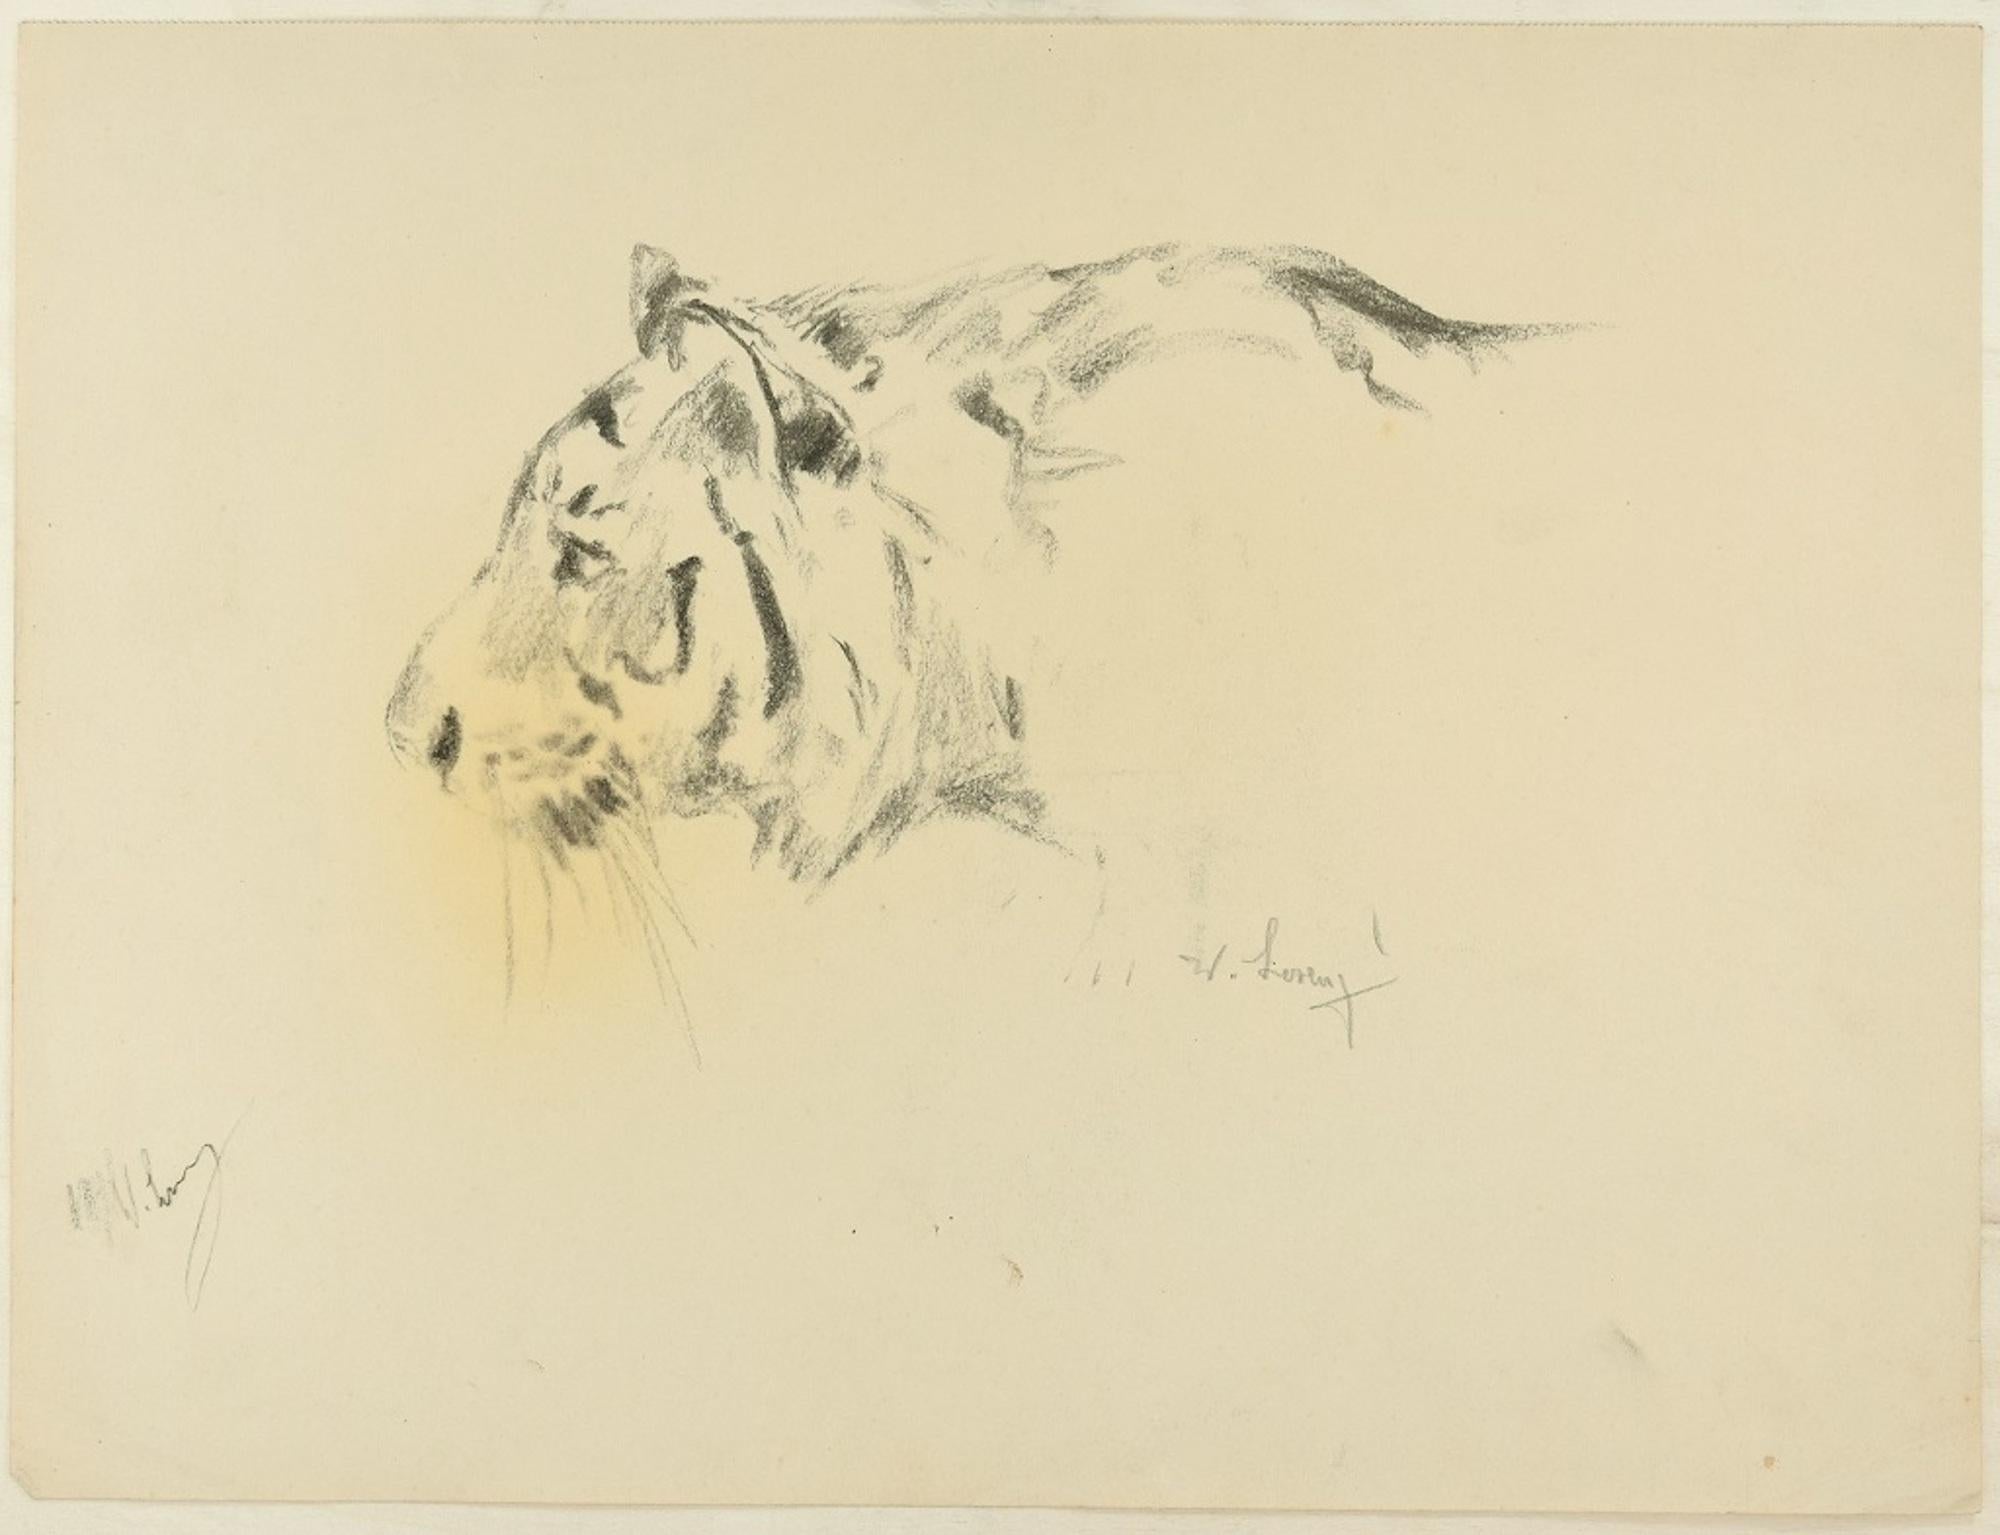 Wilhelm Lorenz Animal Art - Profile of a Tiger - Original Charcoal Drawing by Willy Lorenz - 1940s